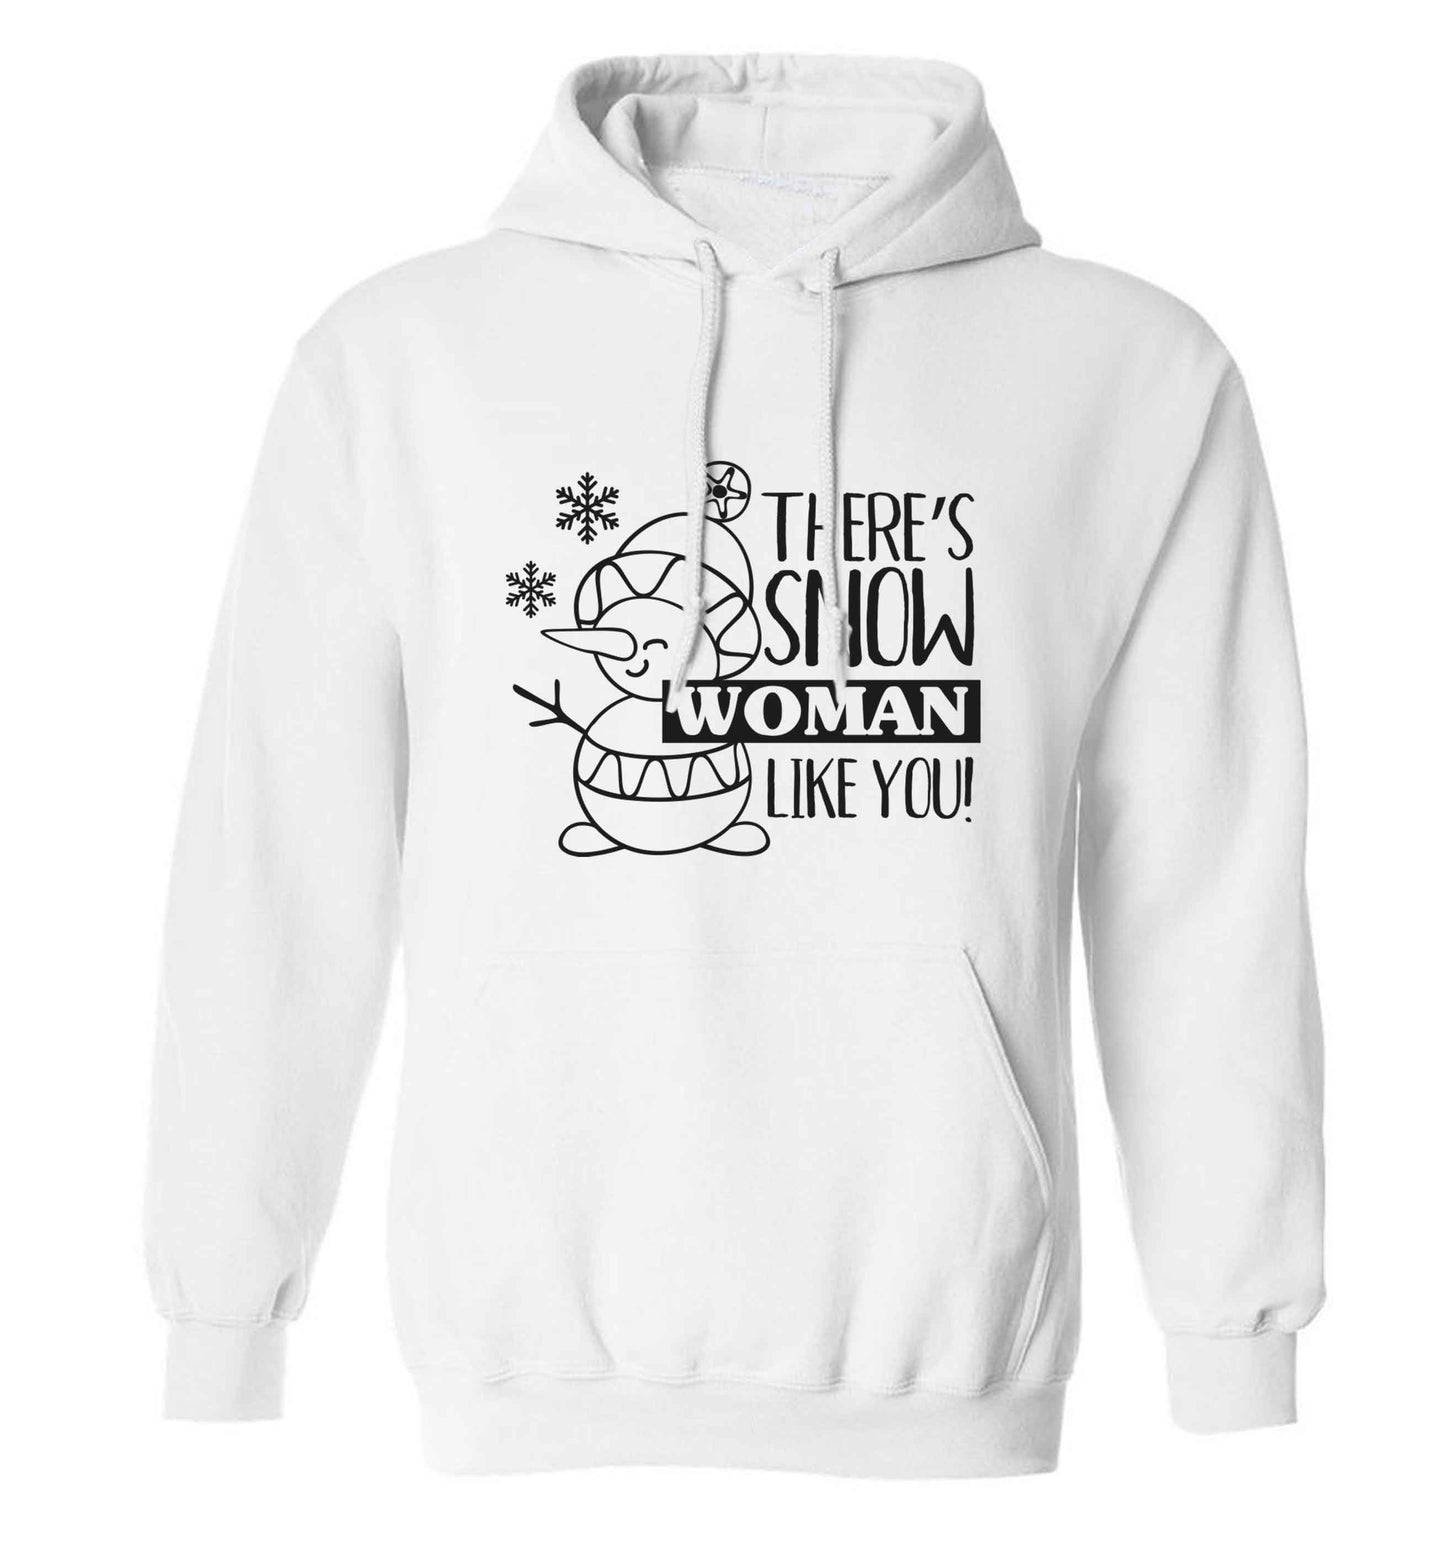 There's snow woman like you adults unisex white hoodie 2XL